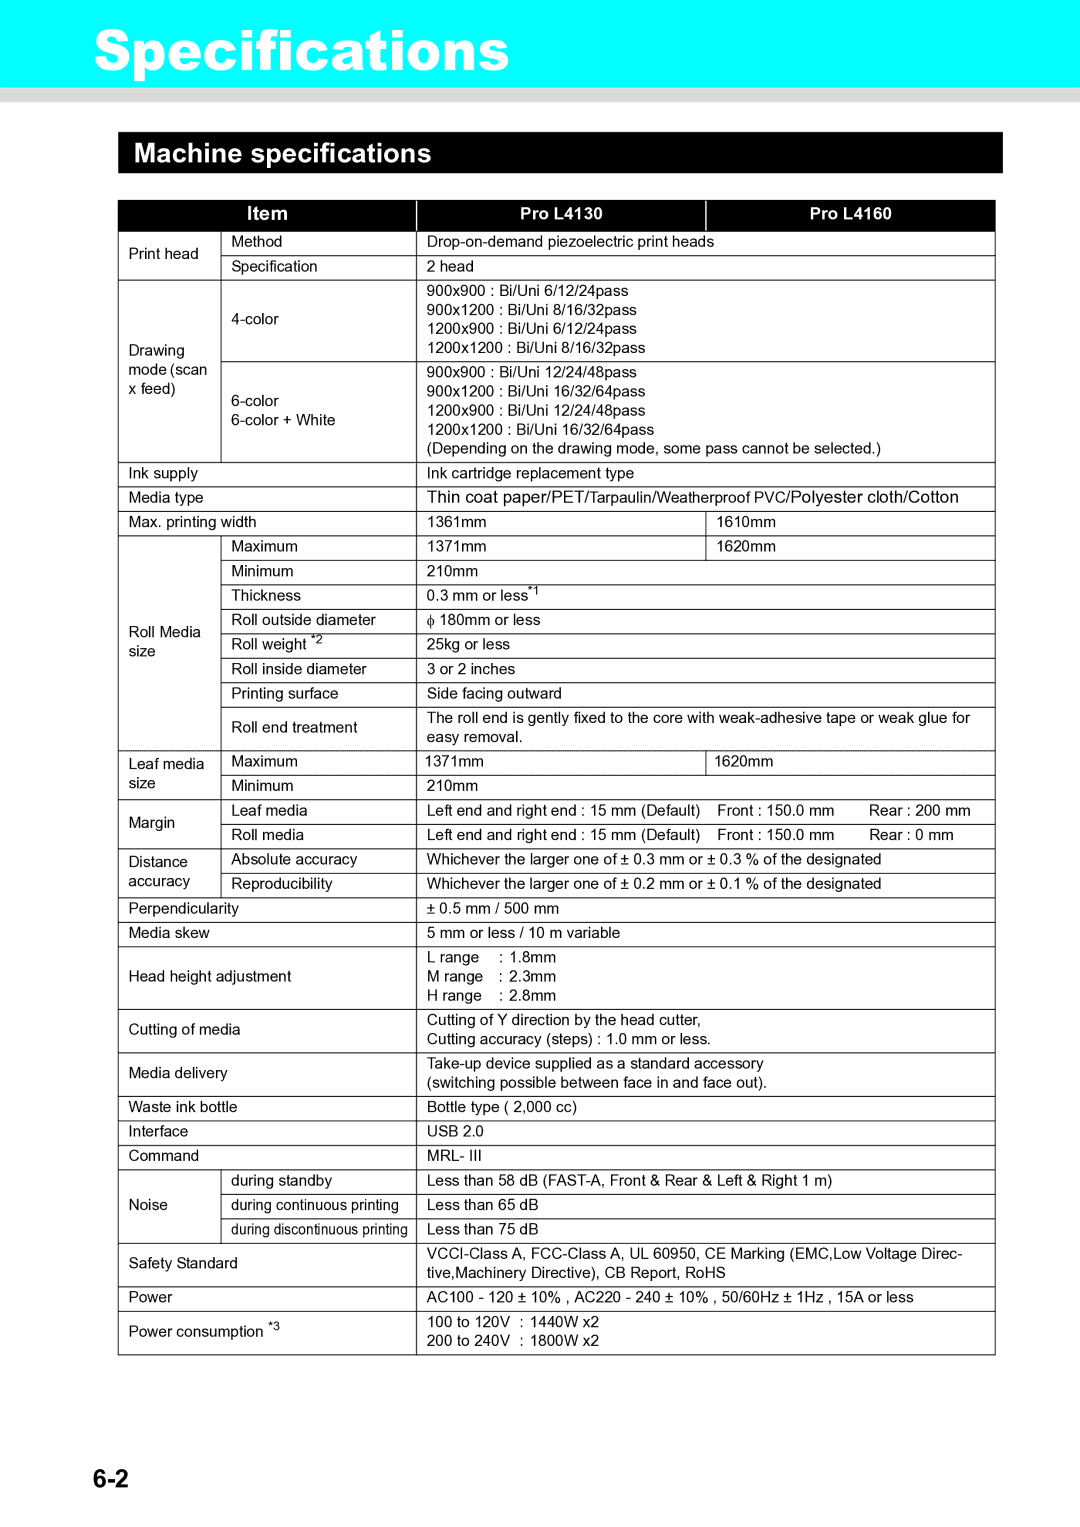 Ricoh L4130, L4160 operation manual Specifications, Machine specifications 